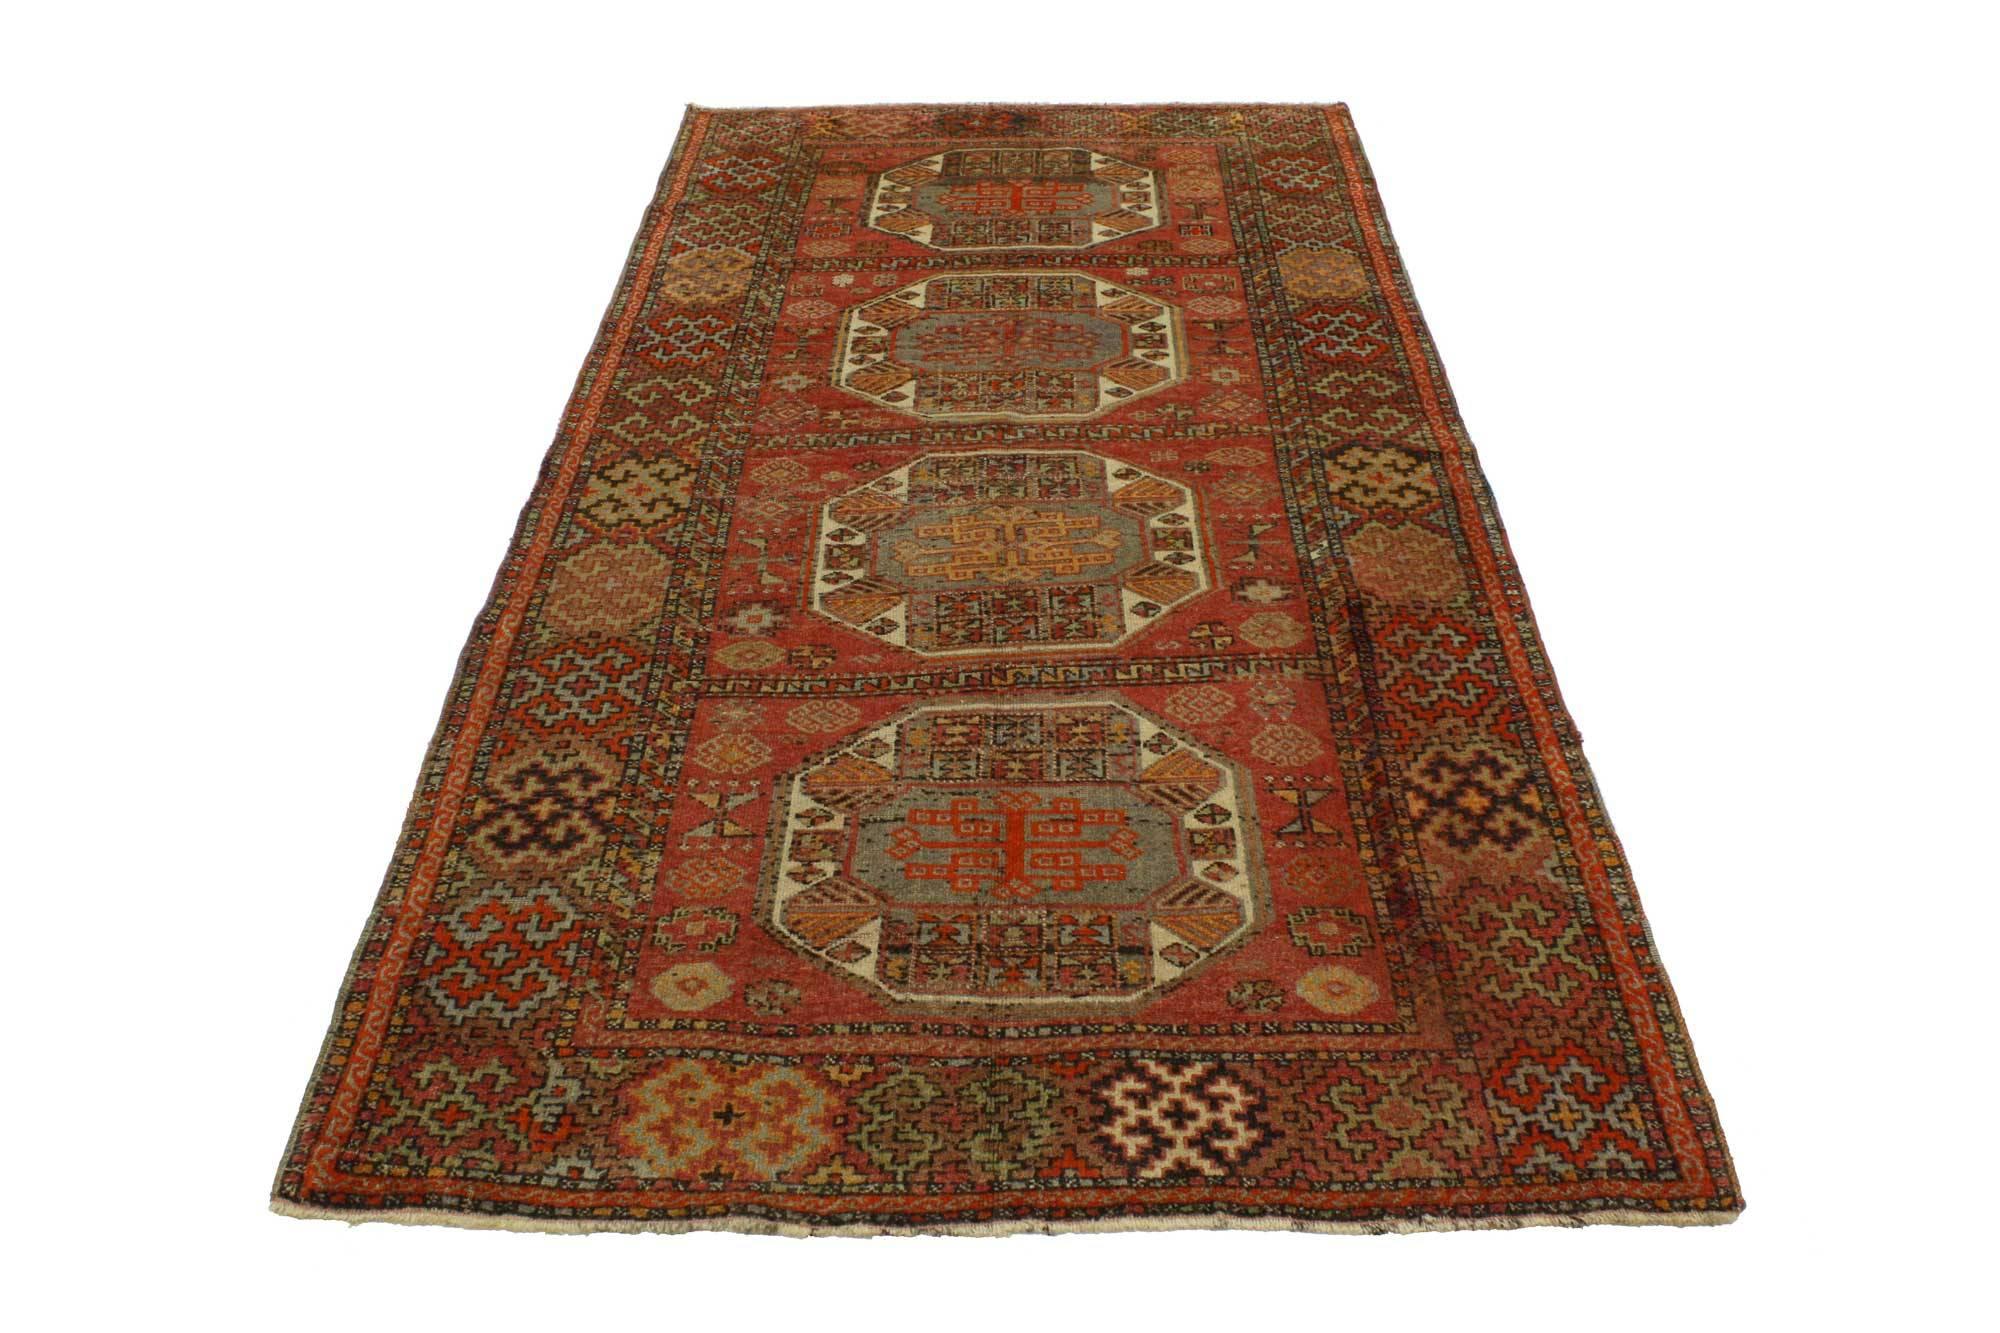 51677, vintage Turkish Oushak runner, hallway runner. This hand-knotted wool vintage Turkish Oushak runner with tribal style features four octagon medallions in separate compartments flanked with symbolic Turkish motifs in an abrashed red field. A